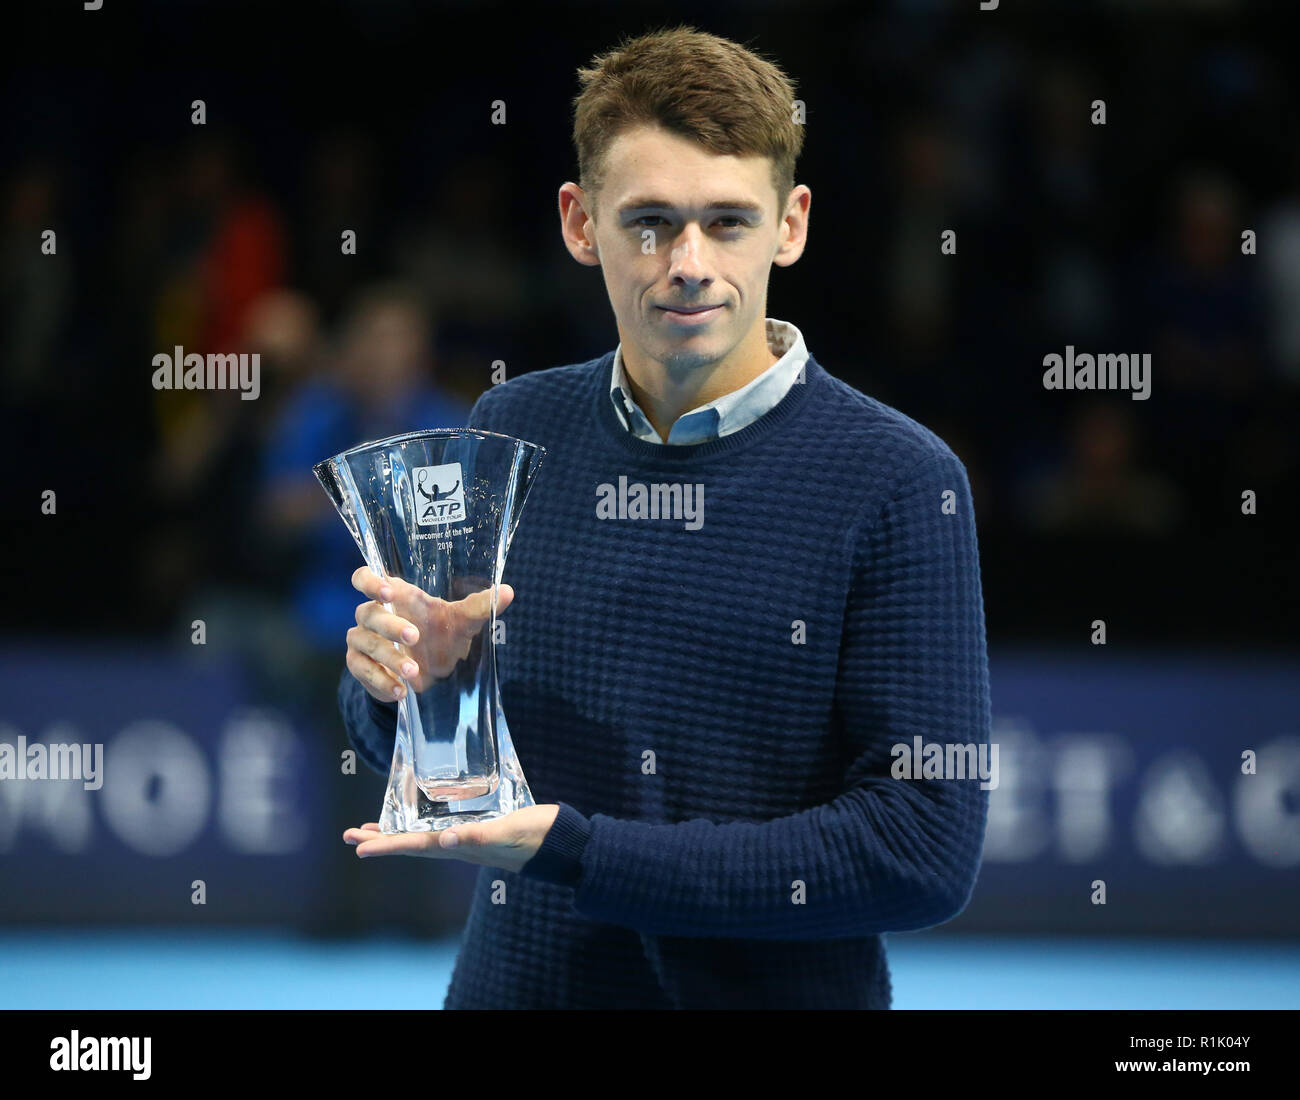 London, UK. November 13, 2018. 2018 ATP World Tour Awards Newcomer Alex De Minaur during Day Three Singles of the Nitto ATP World Tour  Finals played at The O2 Arena, London on November 13 2018. Credit Action Foto Sport Stock Photo